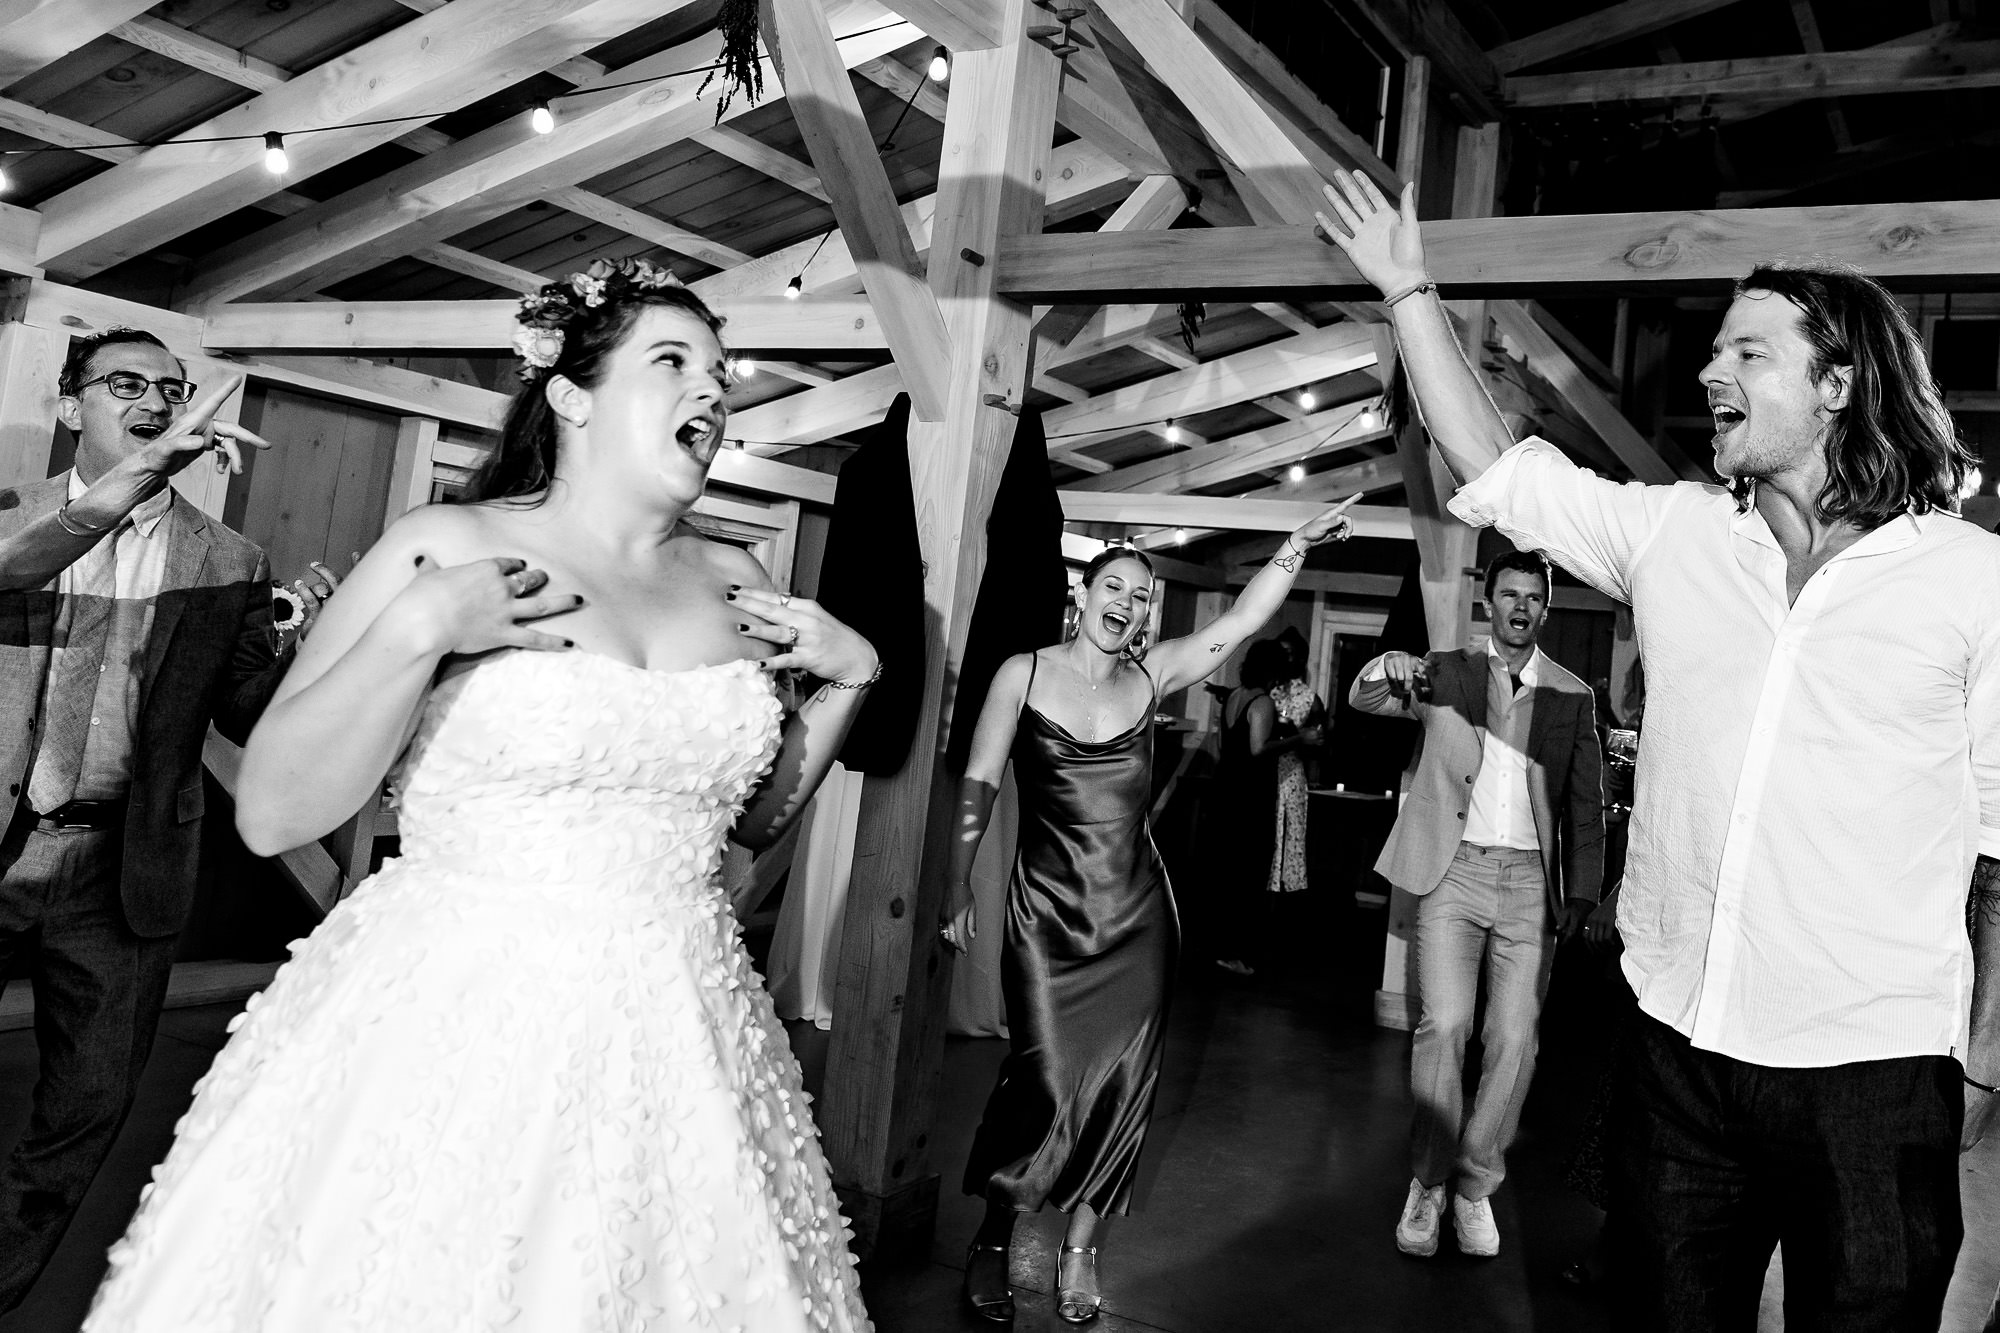 A wedding reception in the barn at Marianmade Farm in Wiscasset, Maine